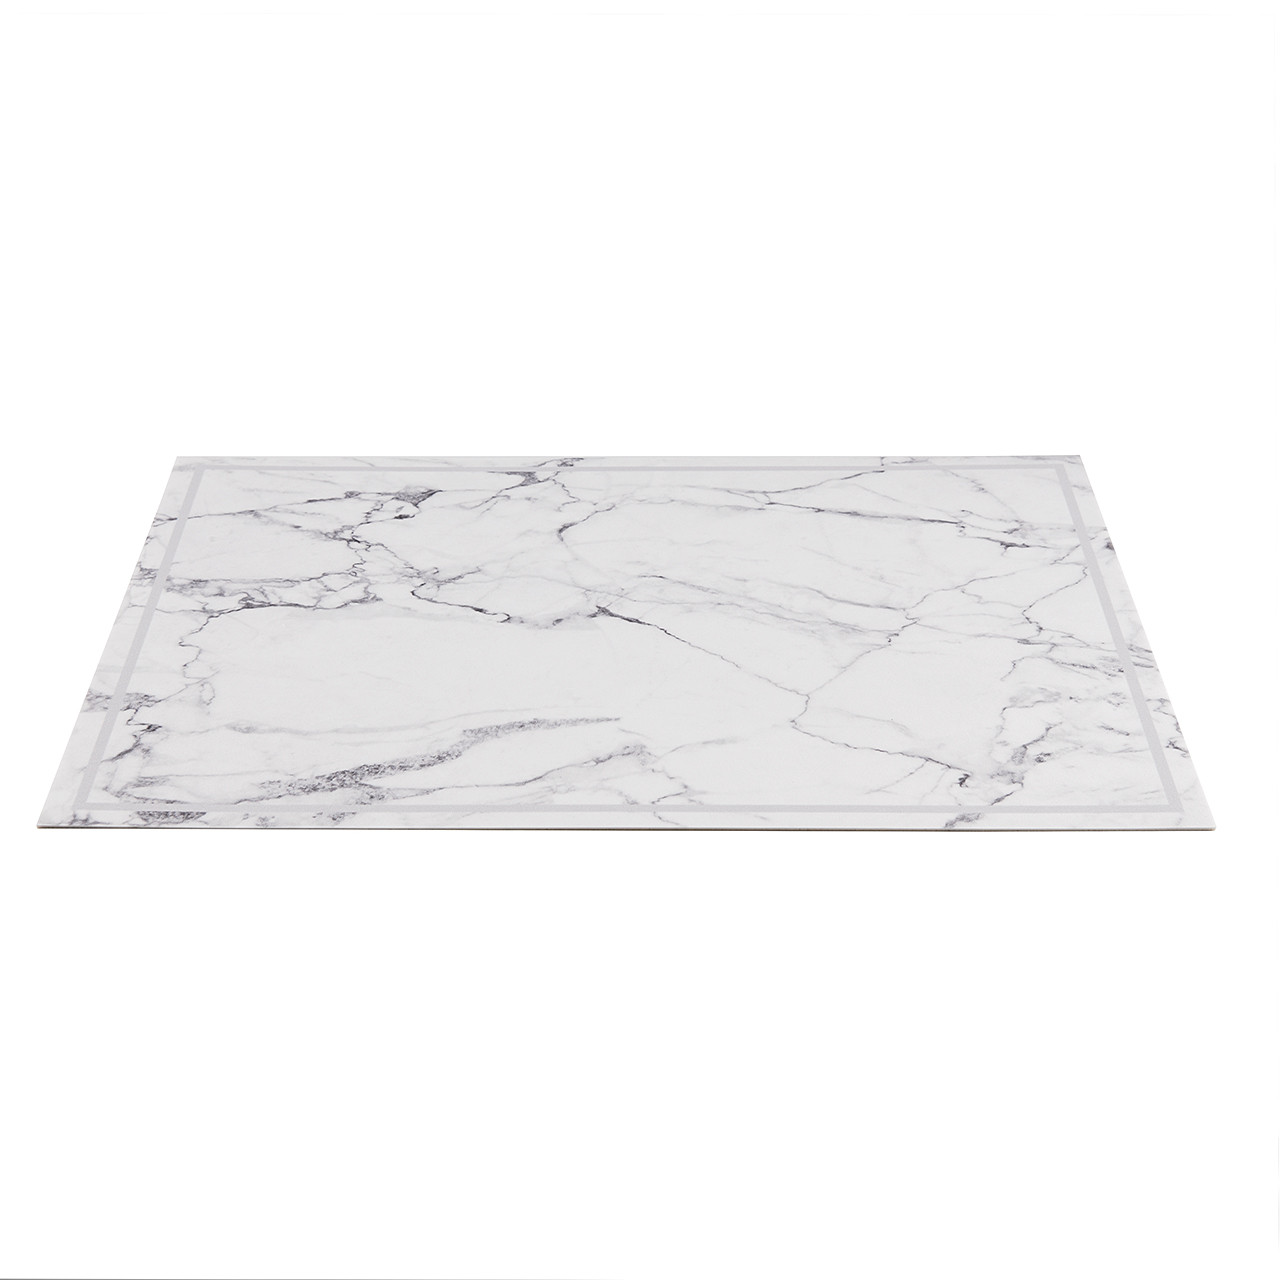 13 x 19 in. White Marble Placemat